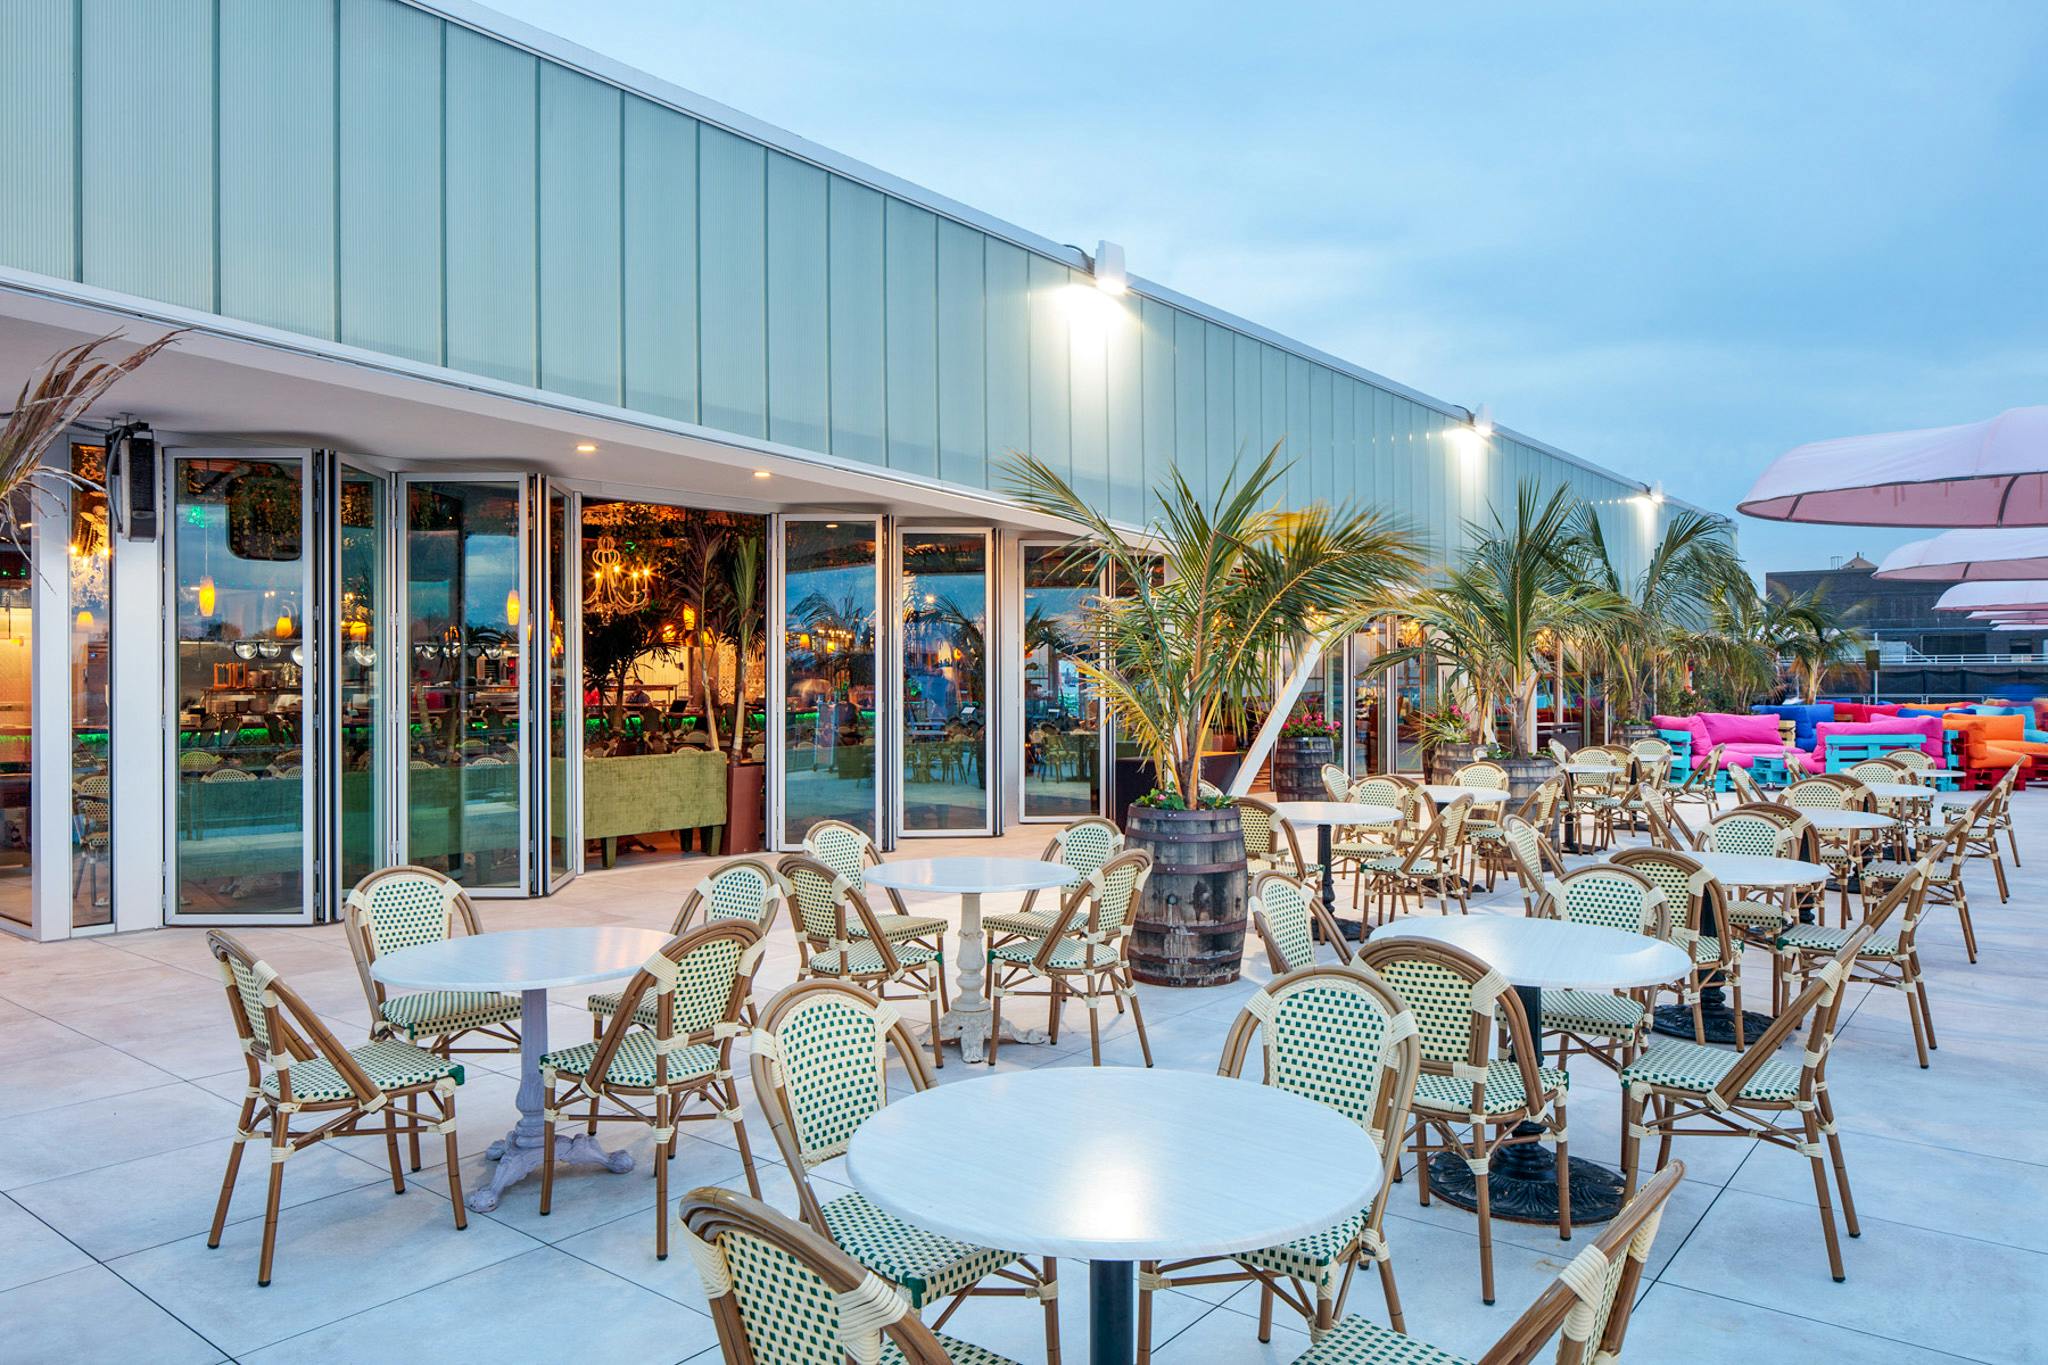 NanaWall commercial glass walls use in rooftop bar